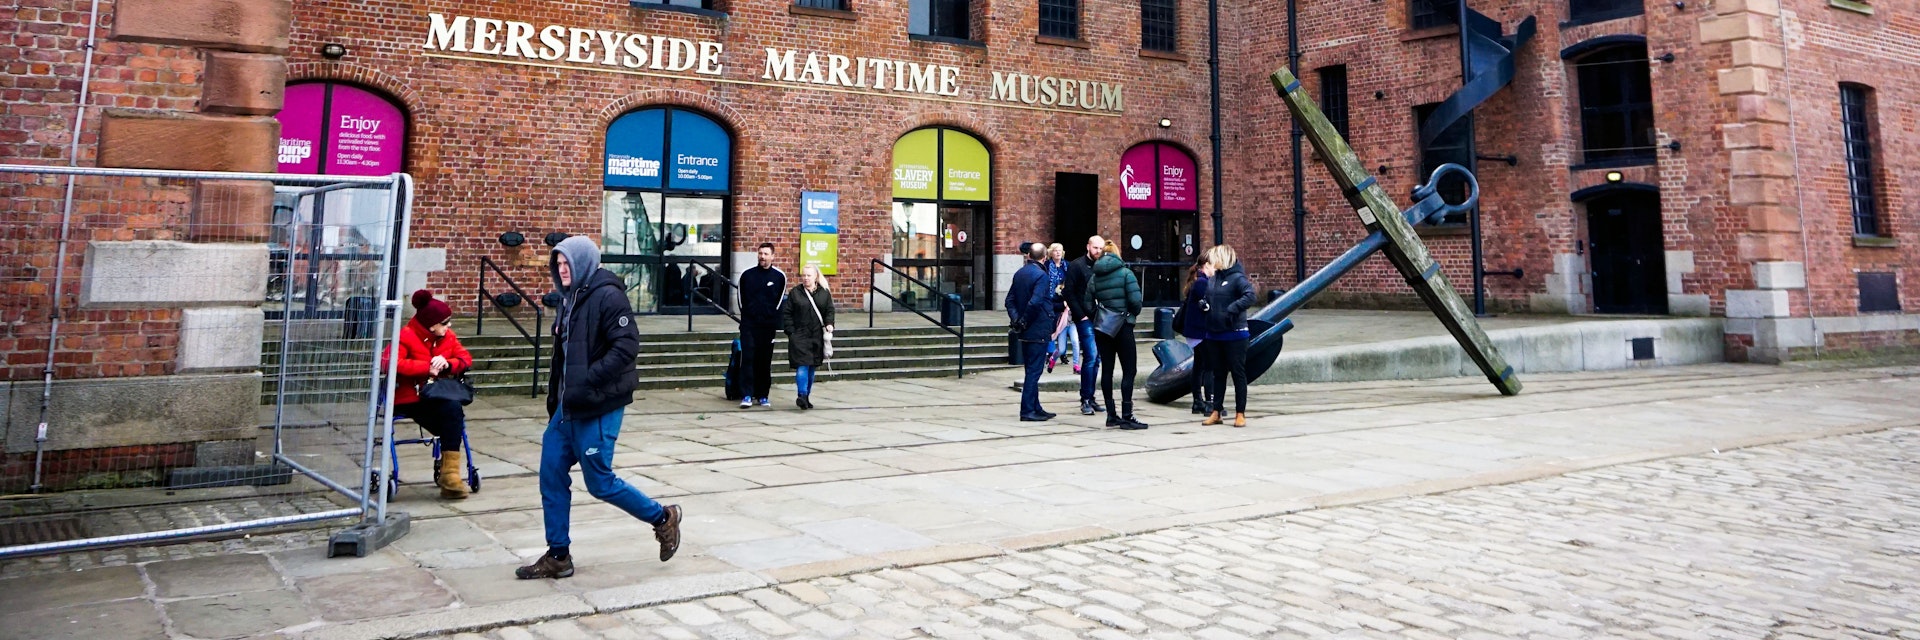 Liverpool, United Kingdom - 6 April 2019; Anchor outside the Merseyside Maritime Museum. Albert Docks; Shutterstock ID 1373597933; your: Bridget Brown; gl: 65050; netsuite: Online Editorial; full: POI Image Update